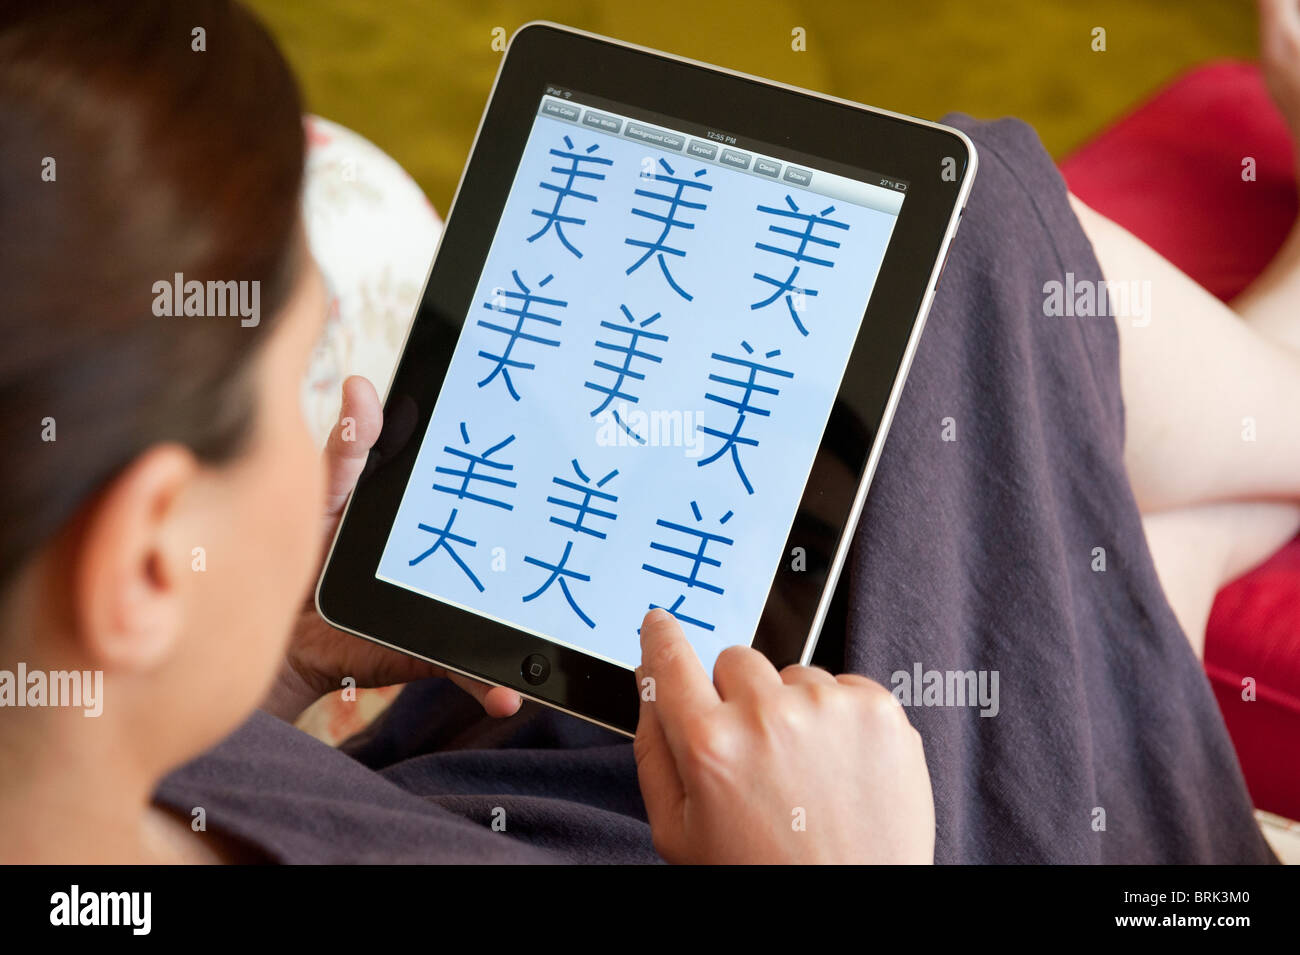 Woman practicing to write mandarin Chinese characters on an iPad